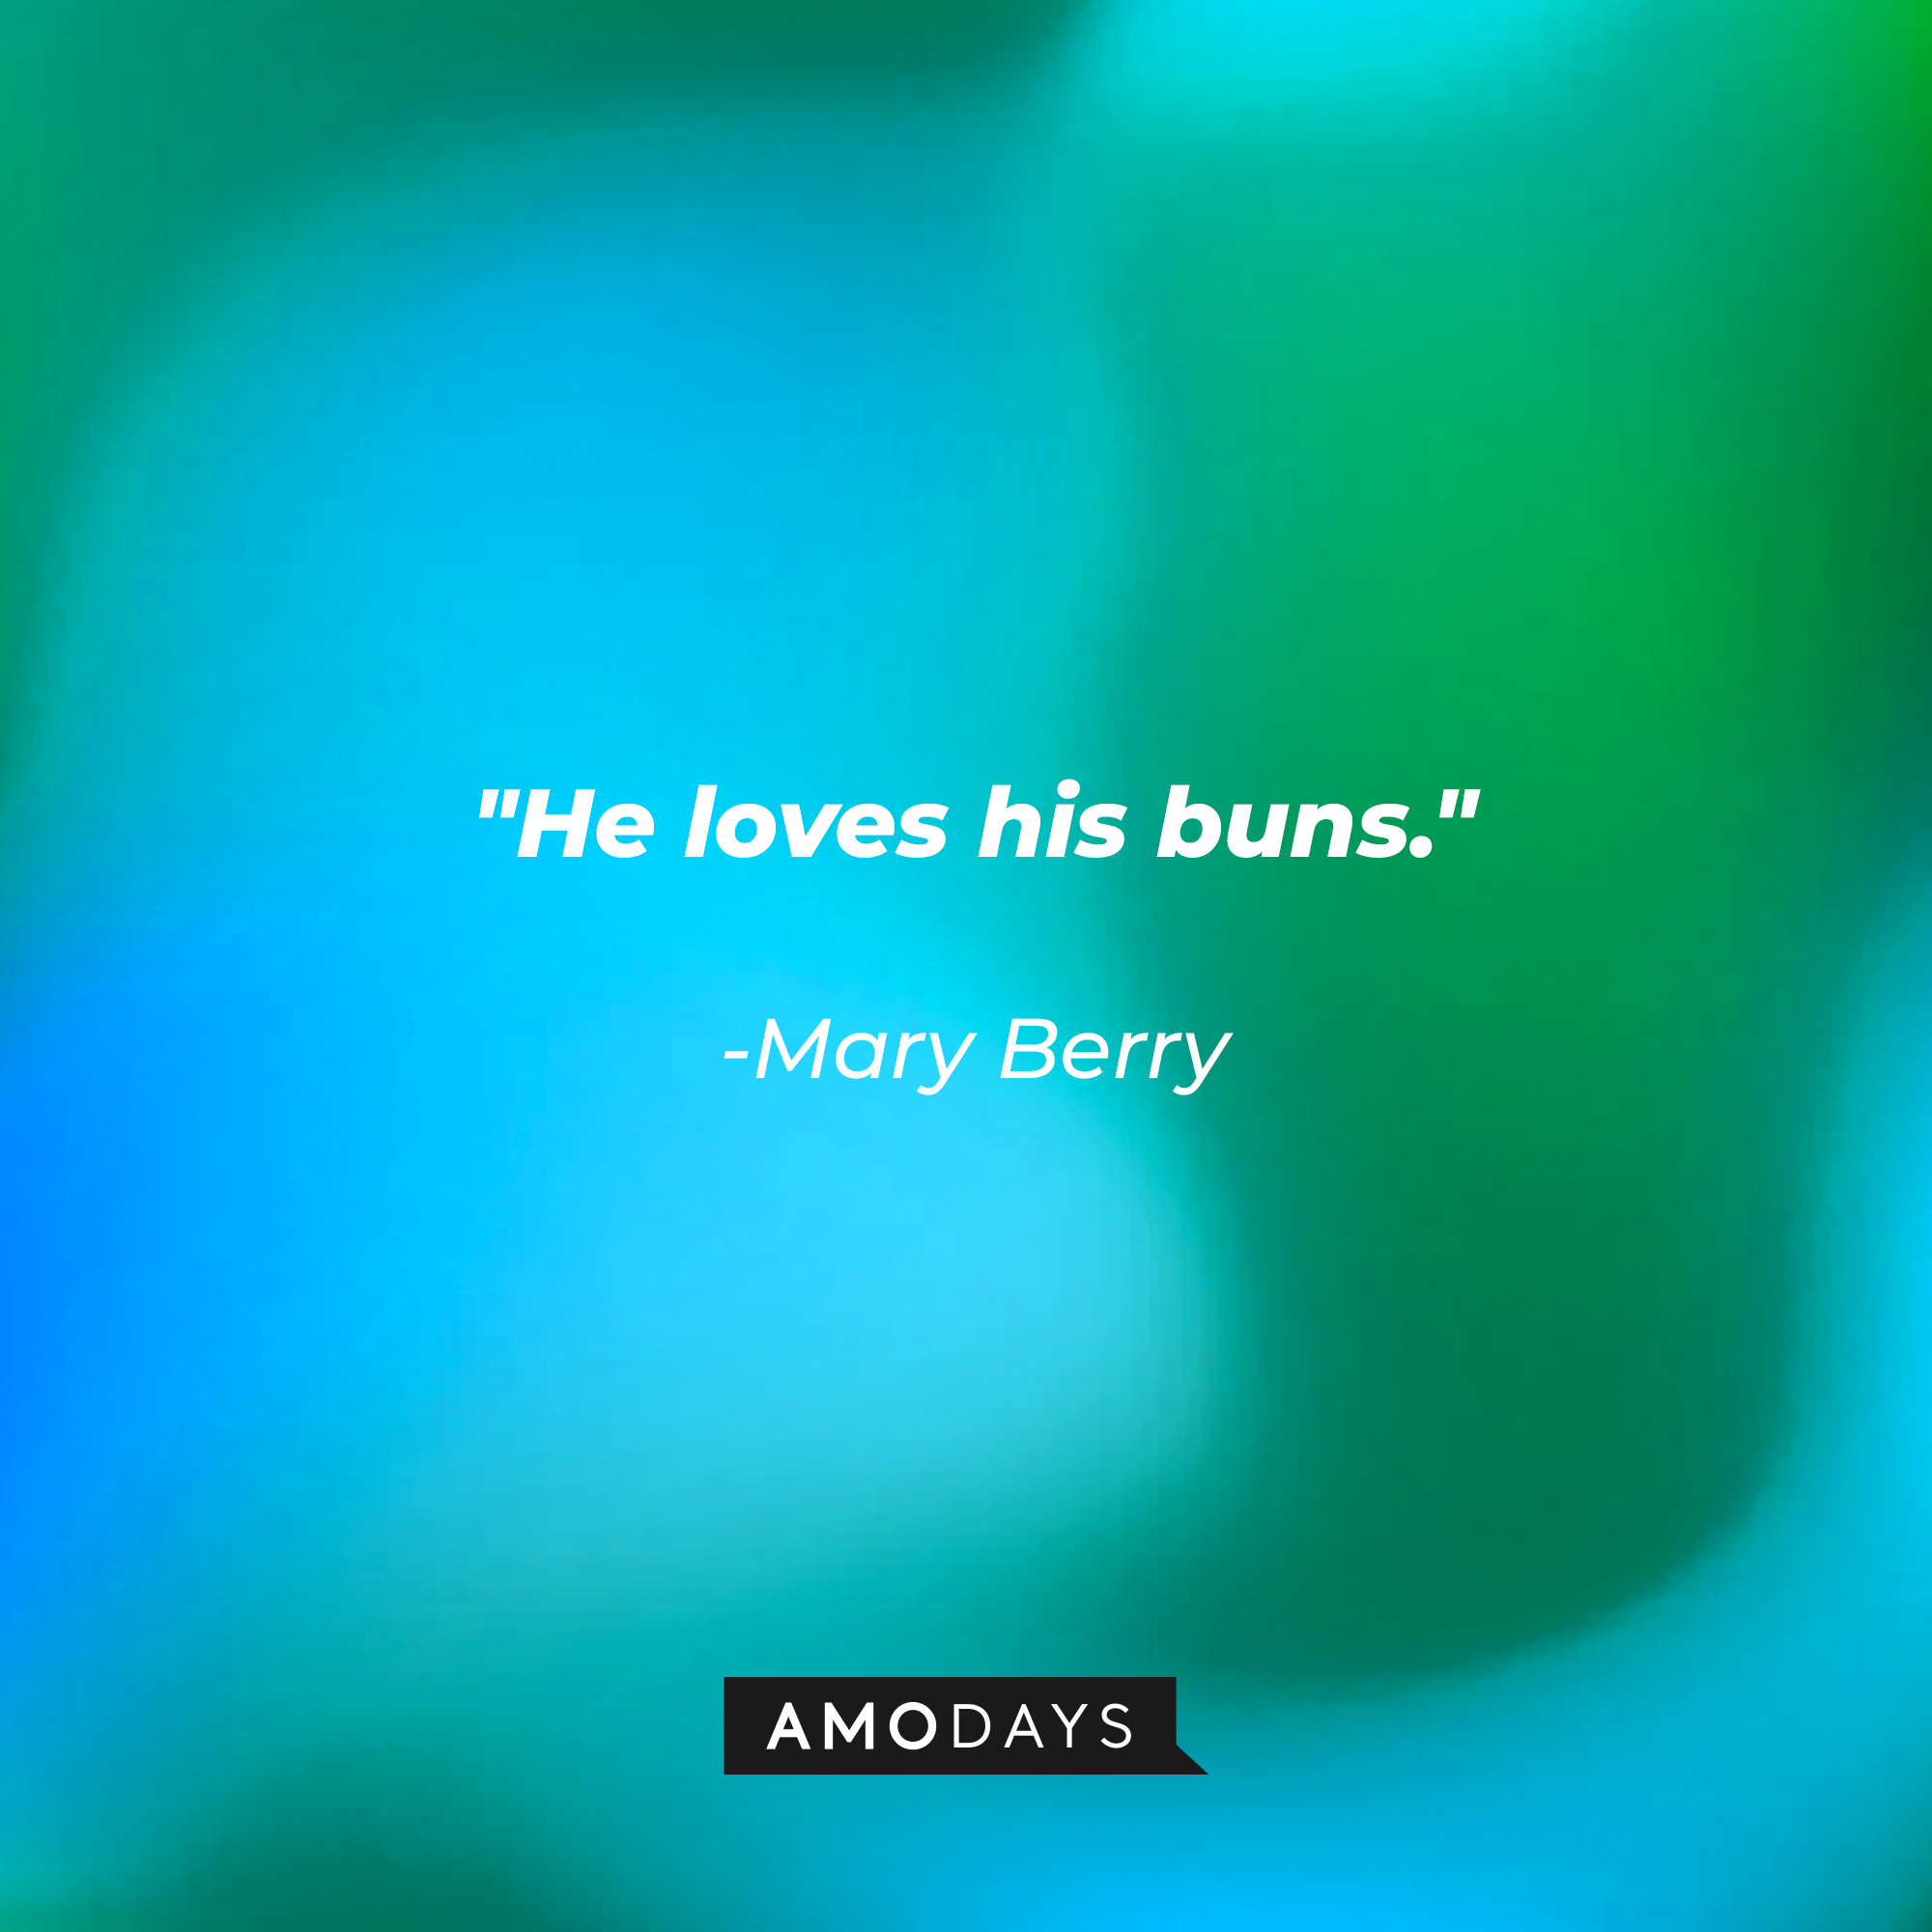 Mary Berry's quote: "He loves his buns." | Image: AmoDays